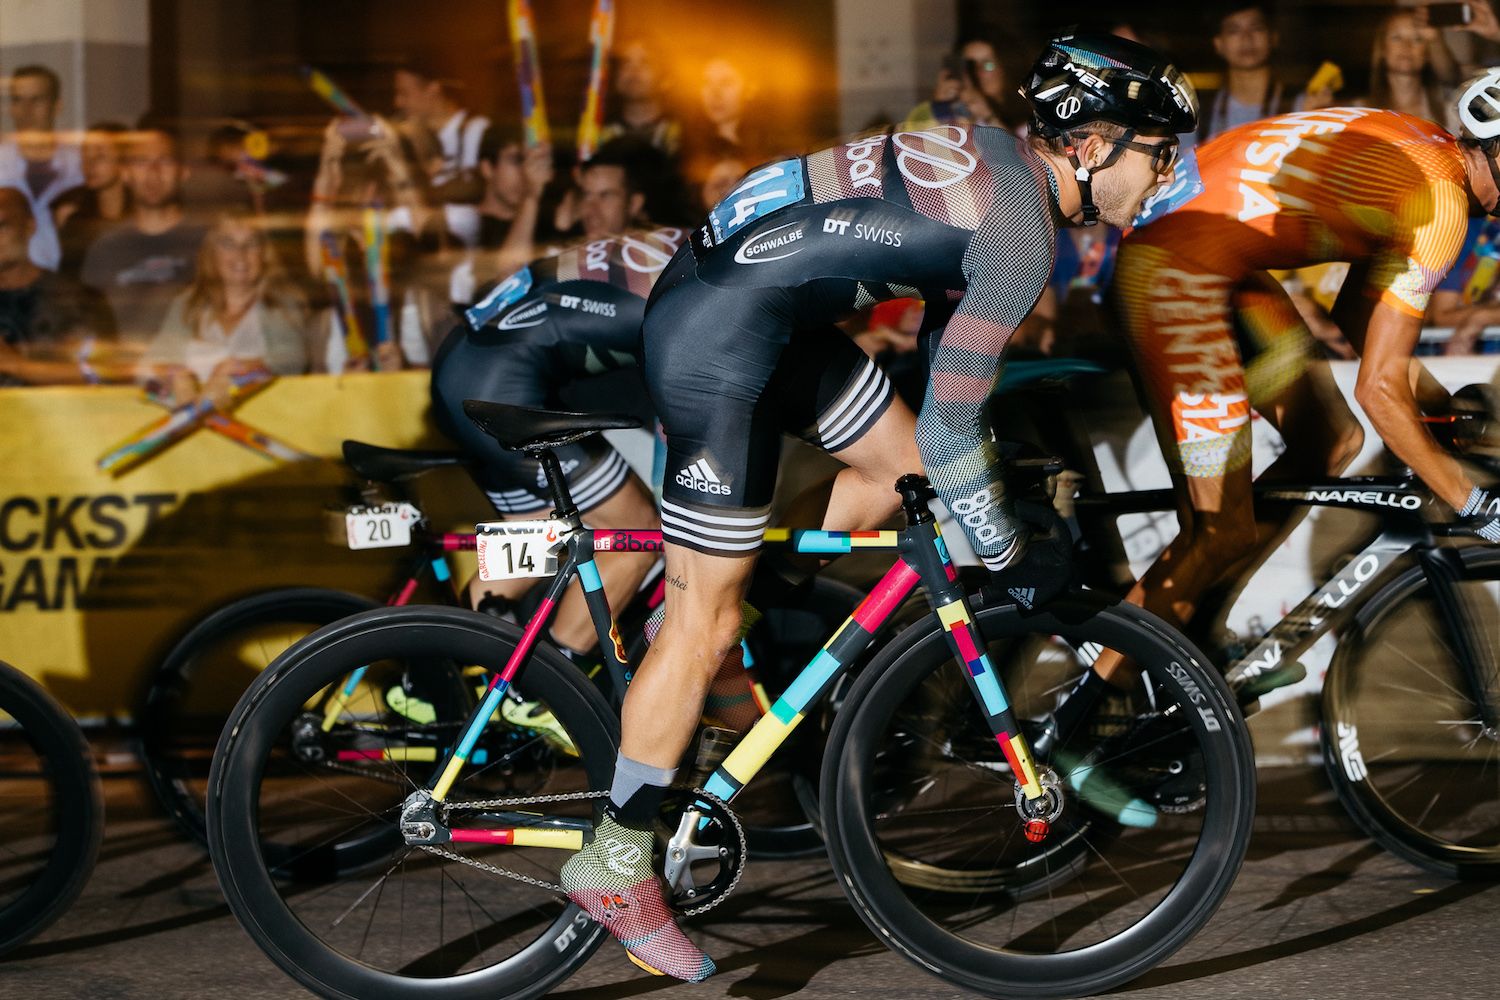 Hook 2019 - Red Hook Criterium Series Suspended for